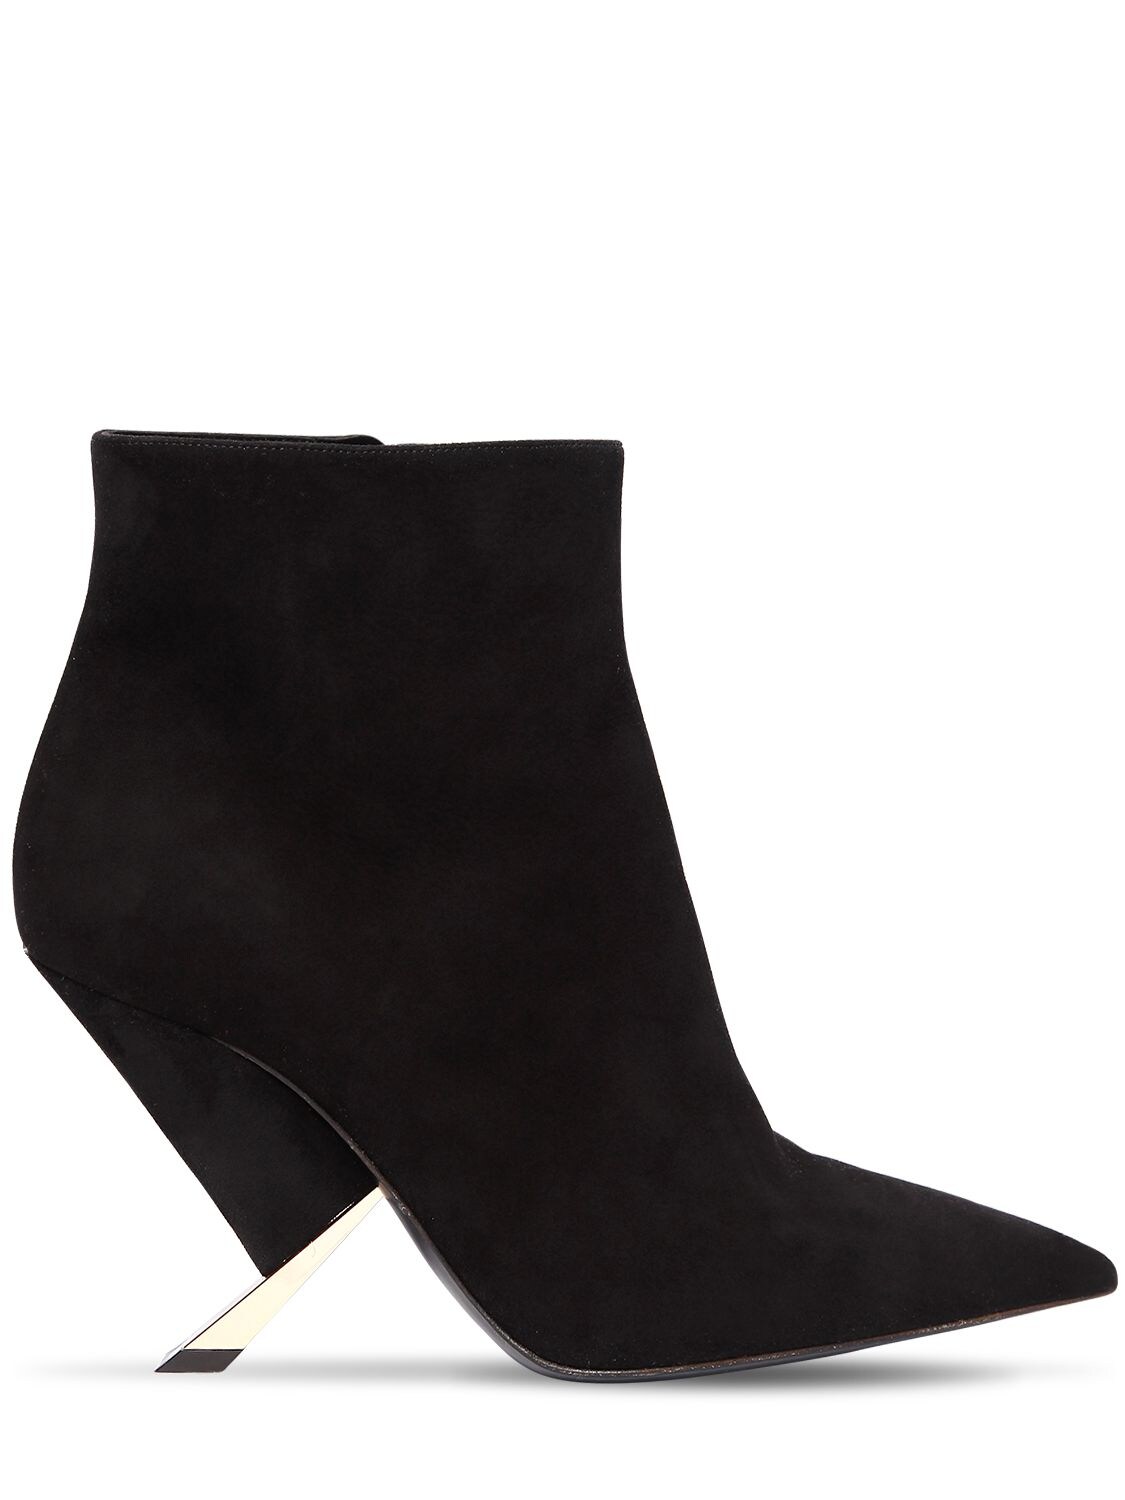 CASADEI 90MM X BLADE SUEDE ANKLE BOOTS,68IAKJ001-MDAW0